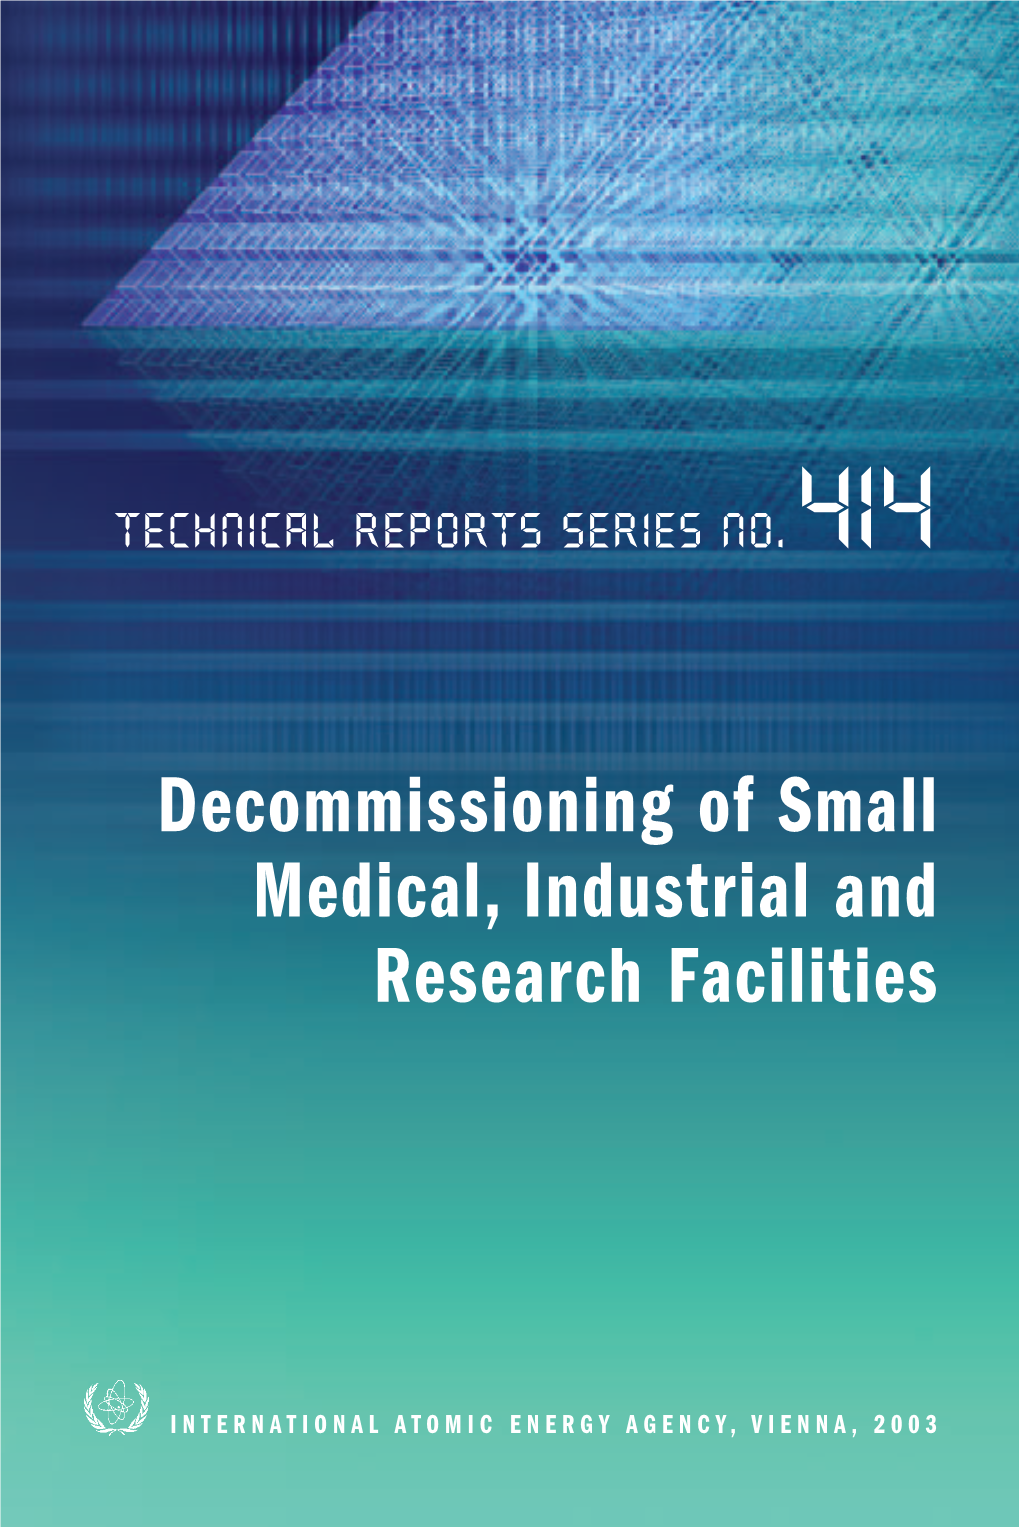 Decommissioning of Small Medical, Industrial and Research Facilities